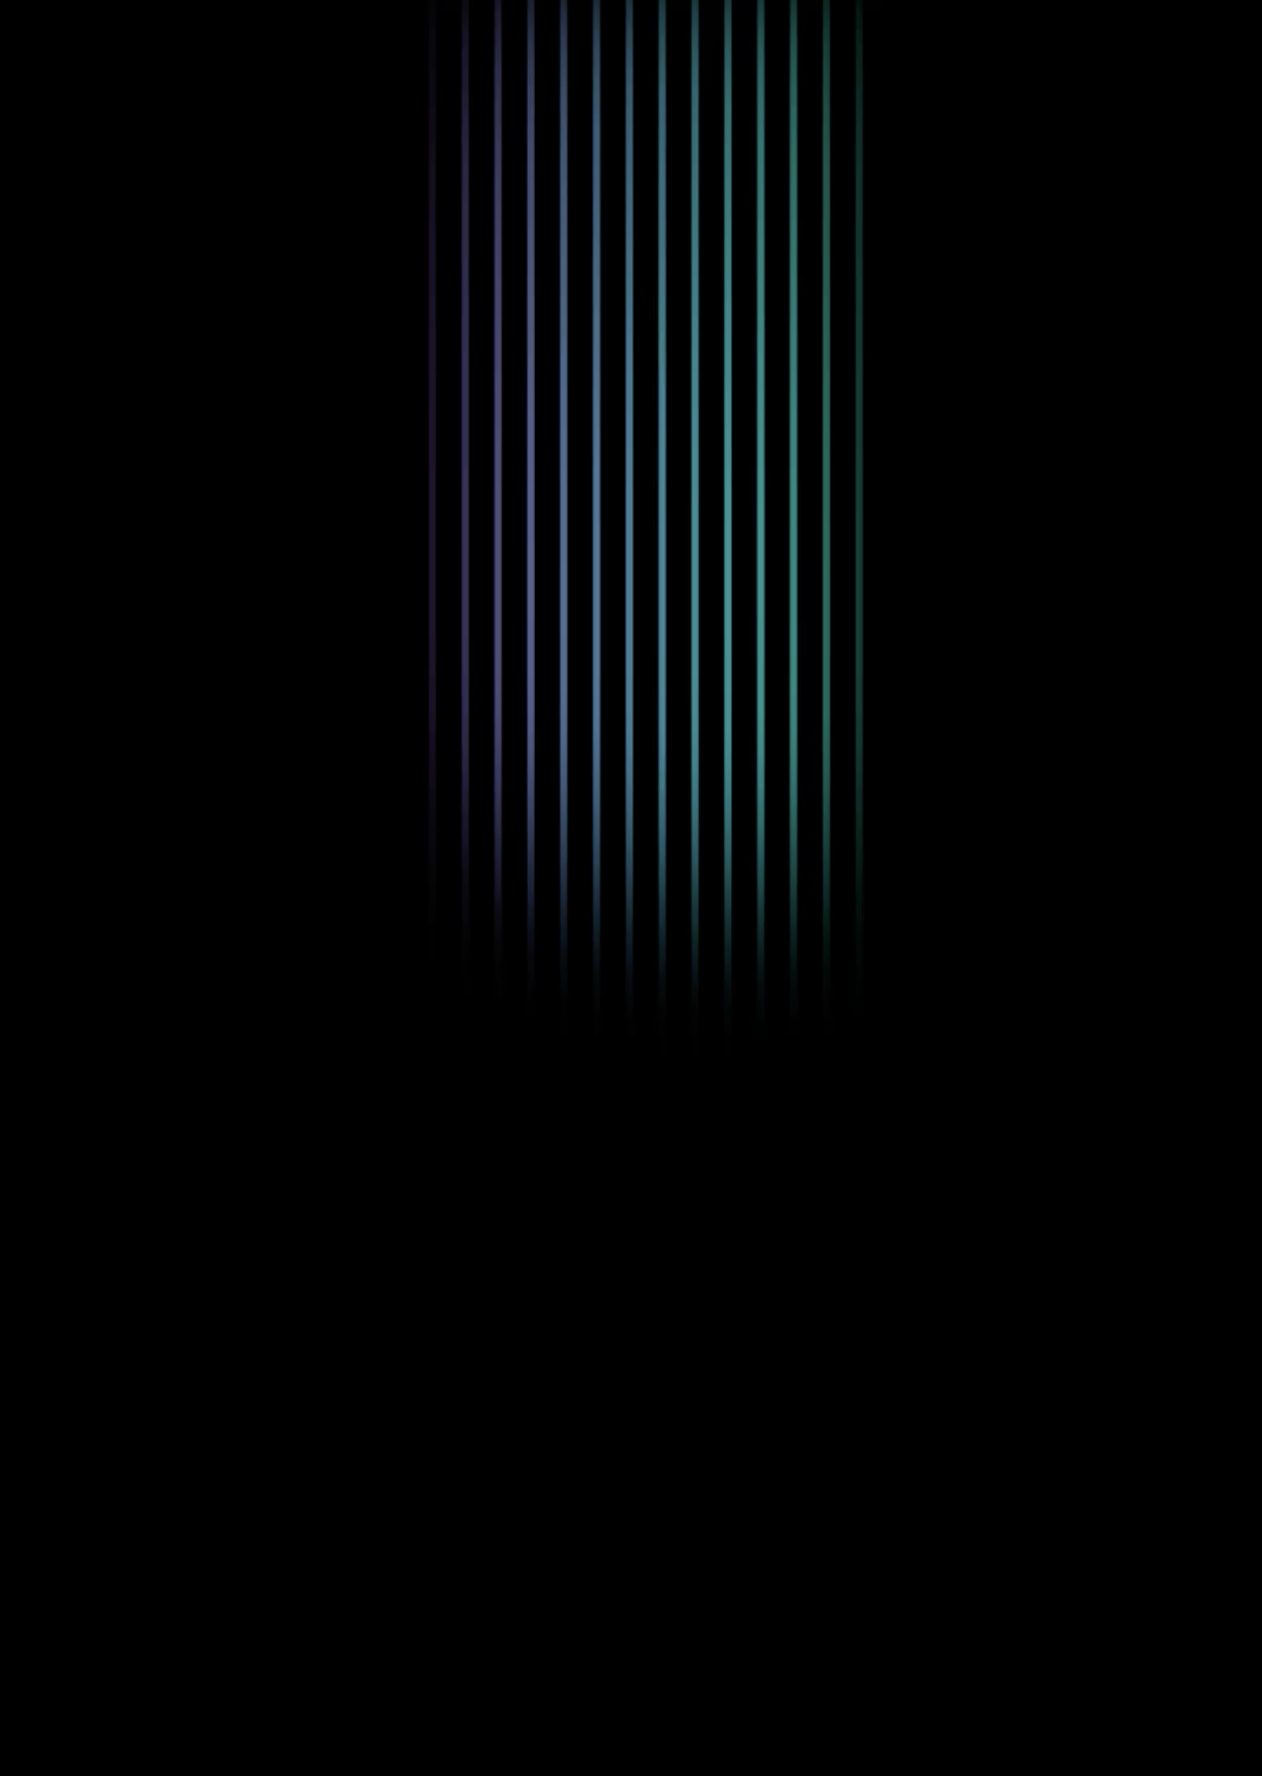 Blue graphic lines on a black background